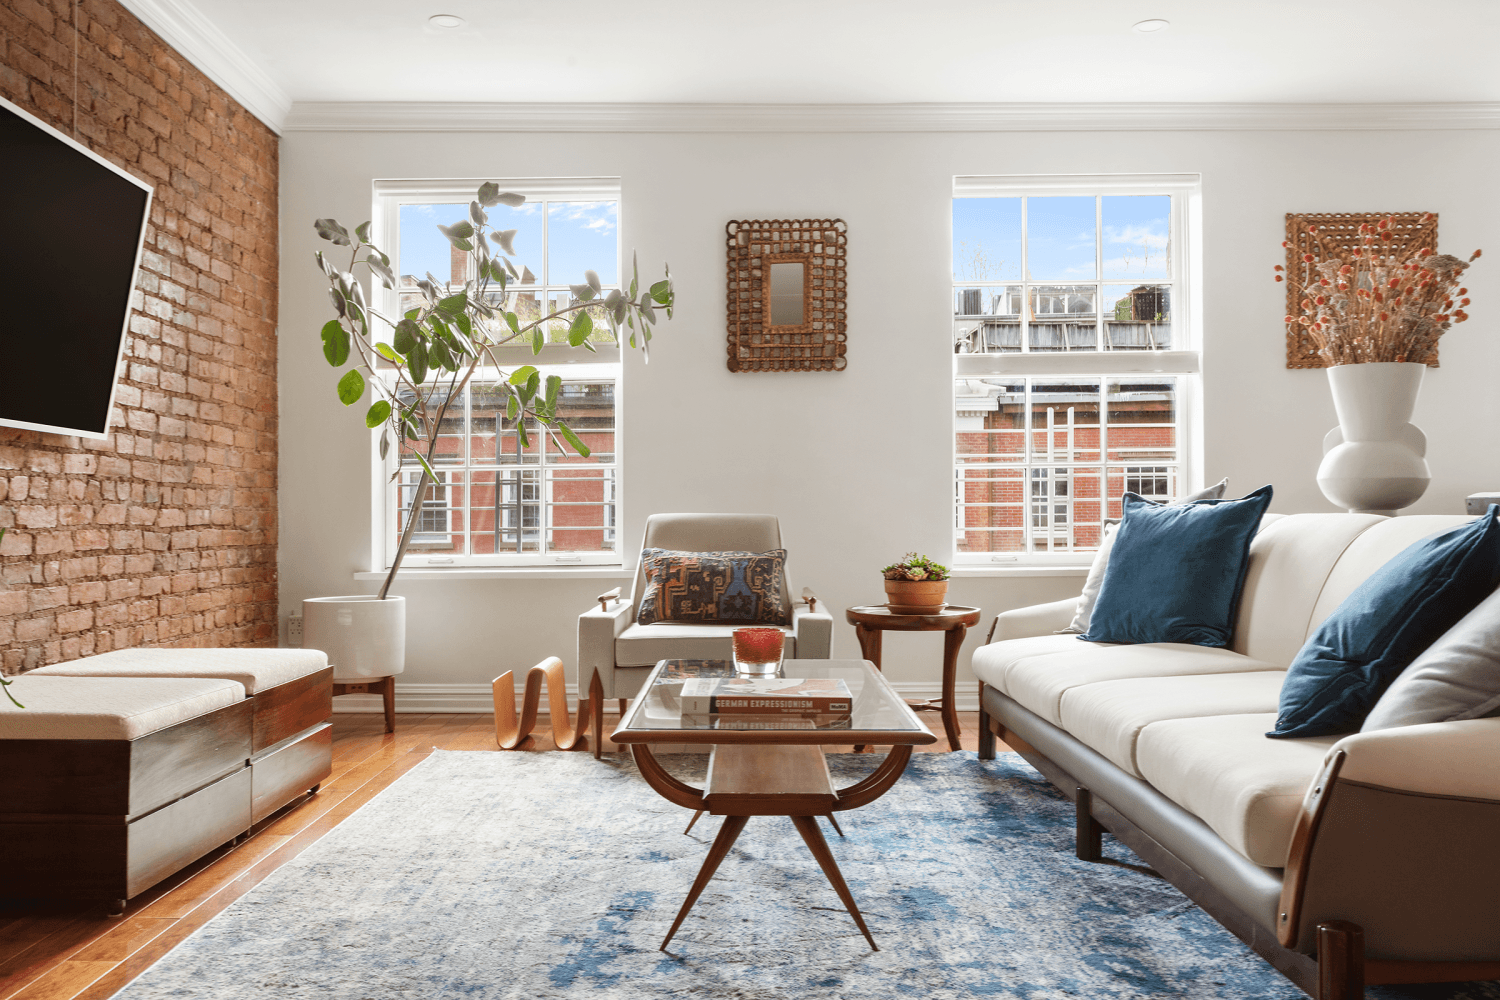 Truly a dream home in the heart of Chelsea, this gorgeously renovated duplexhomeoffers an unparalleled living experience featuring 2 bedrooms, 2 bathrooms, and a remarkable 600 square foot private rooftop ...